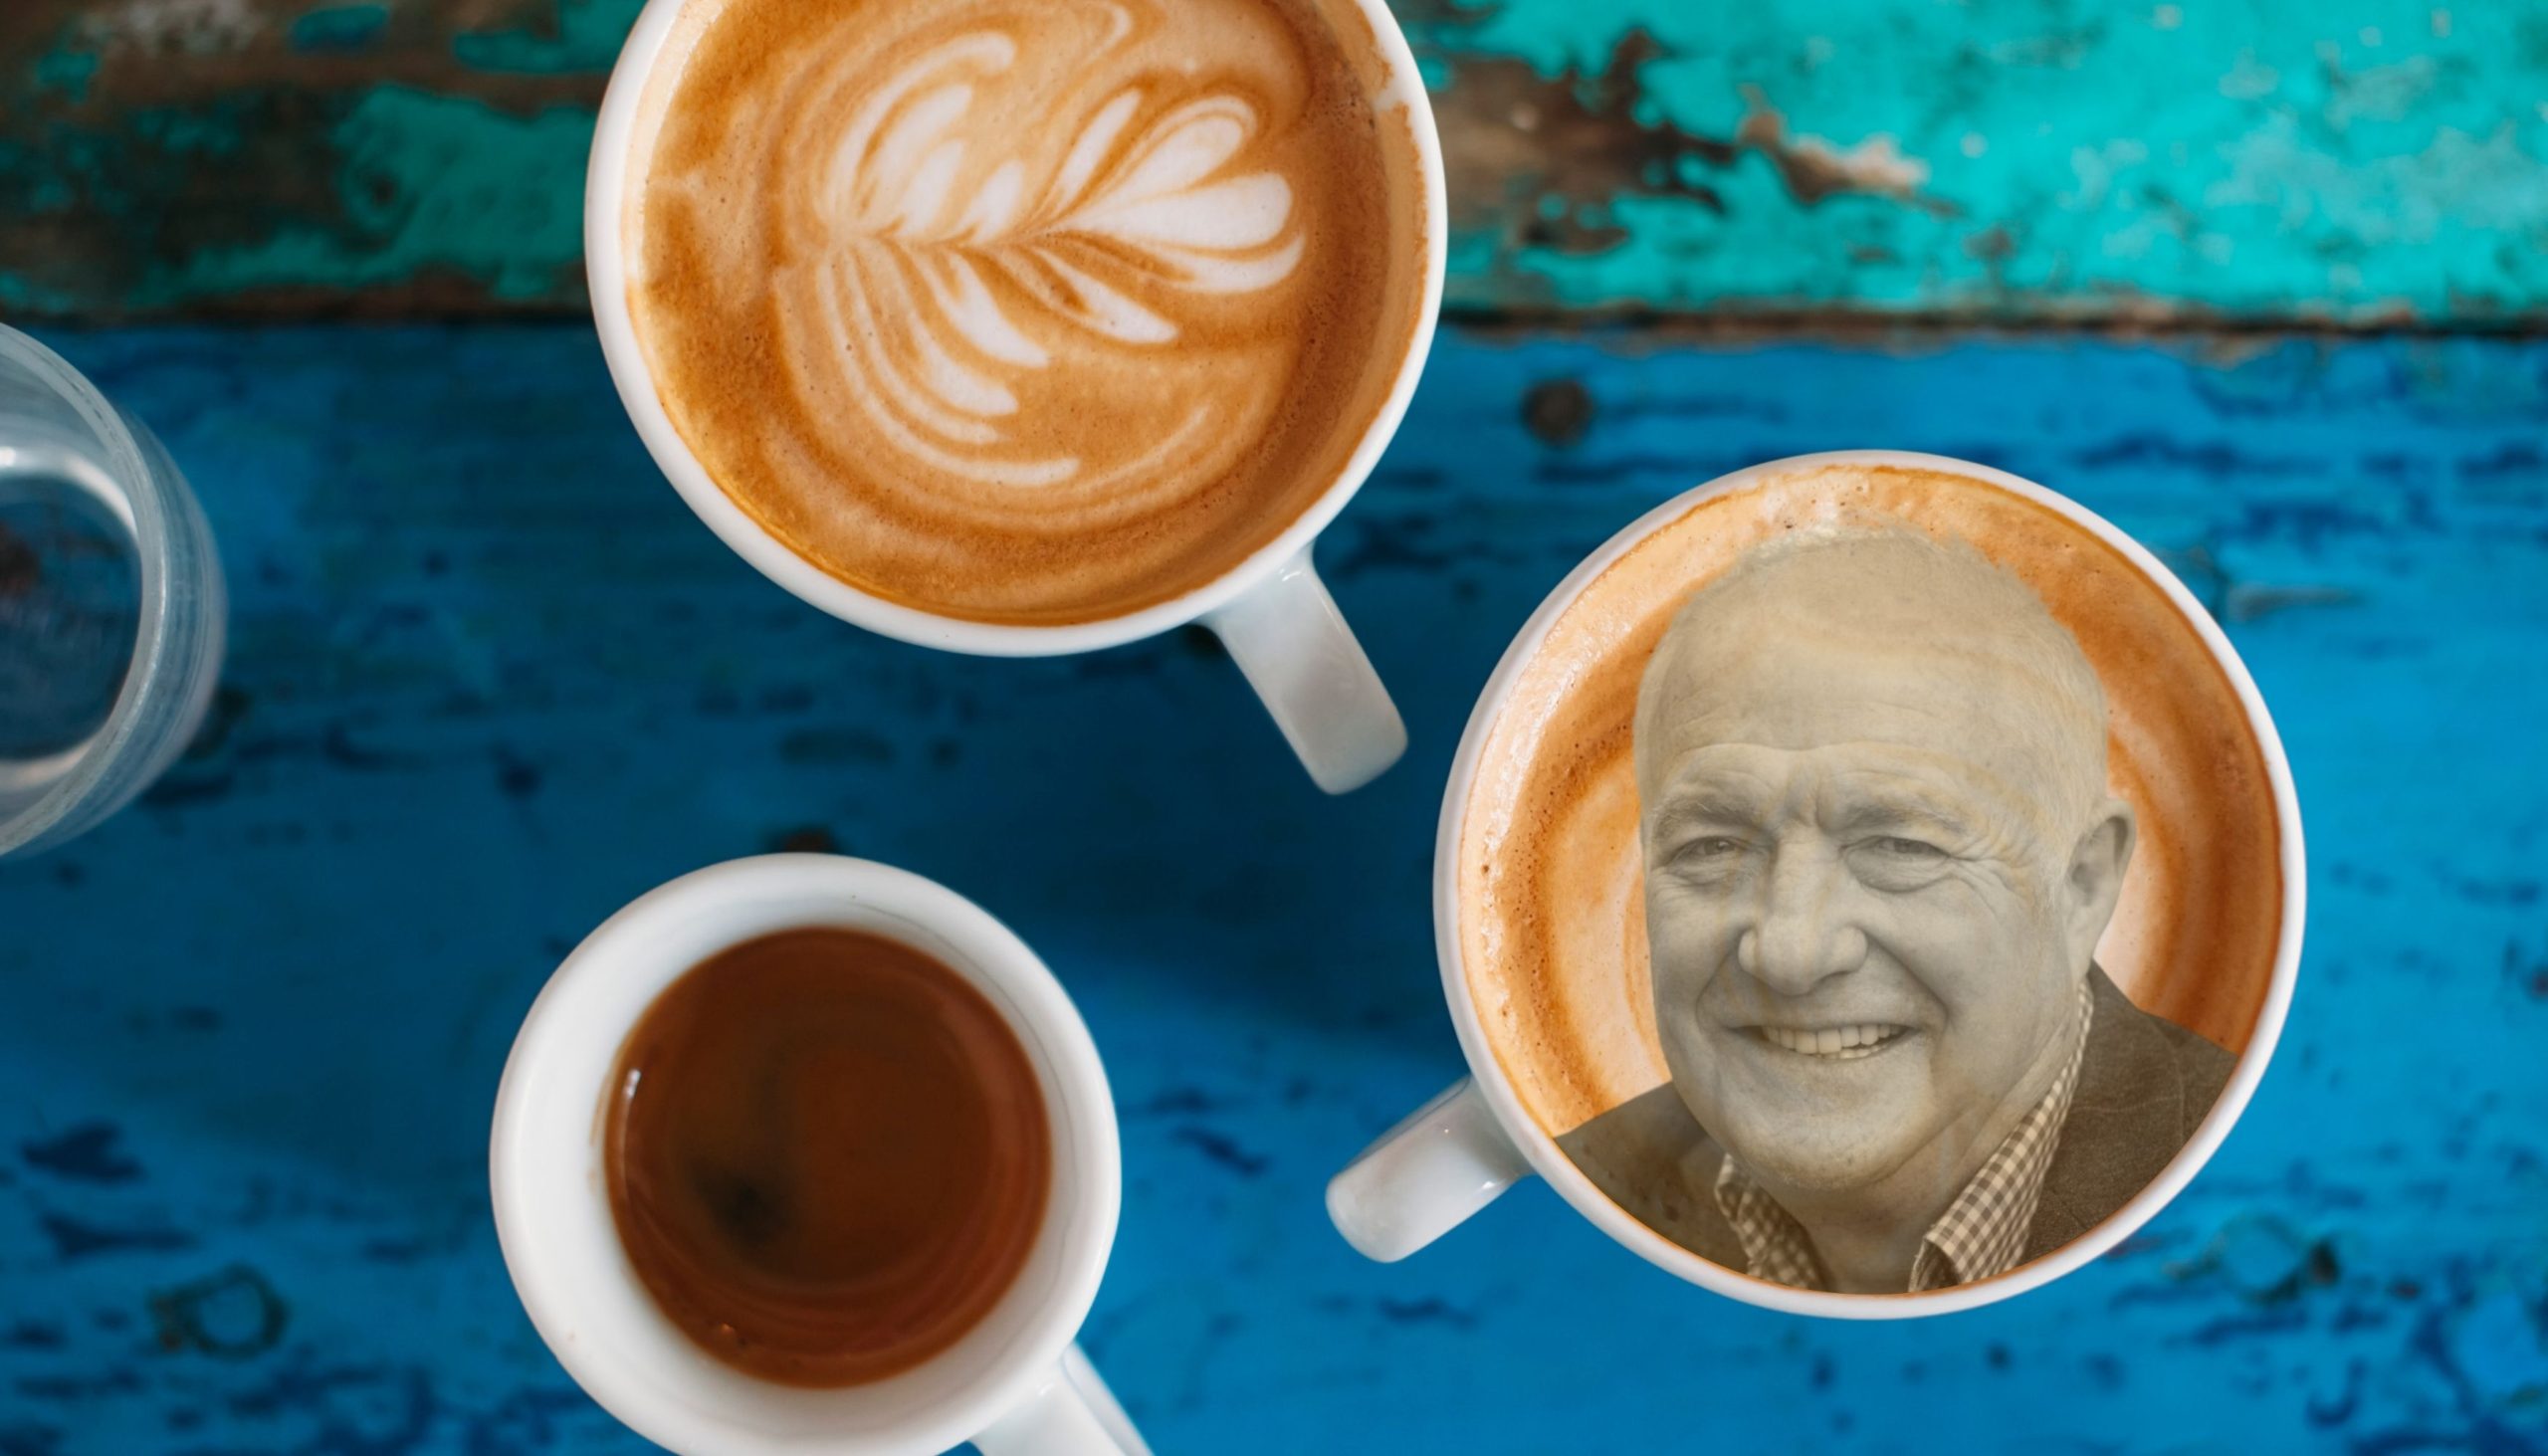 From fillets of fish to flat whites: Rick Stein is opening a coffee shop in Padstow